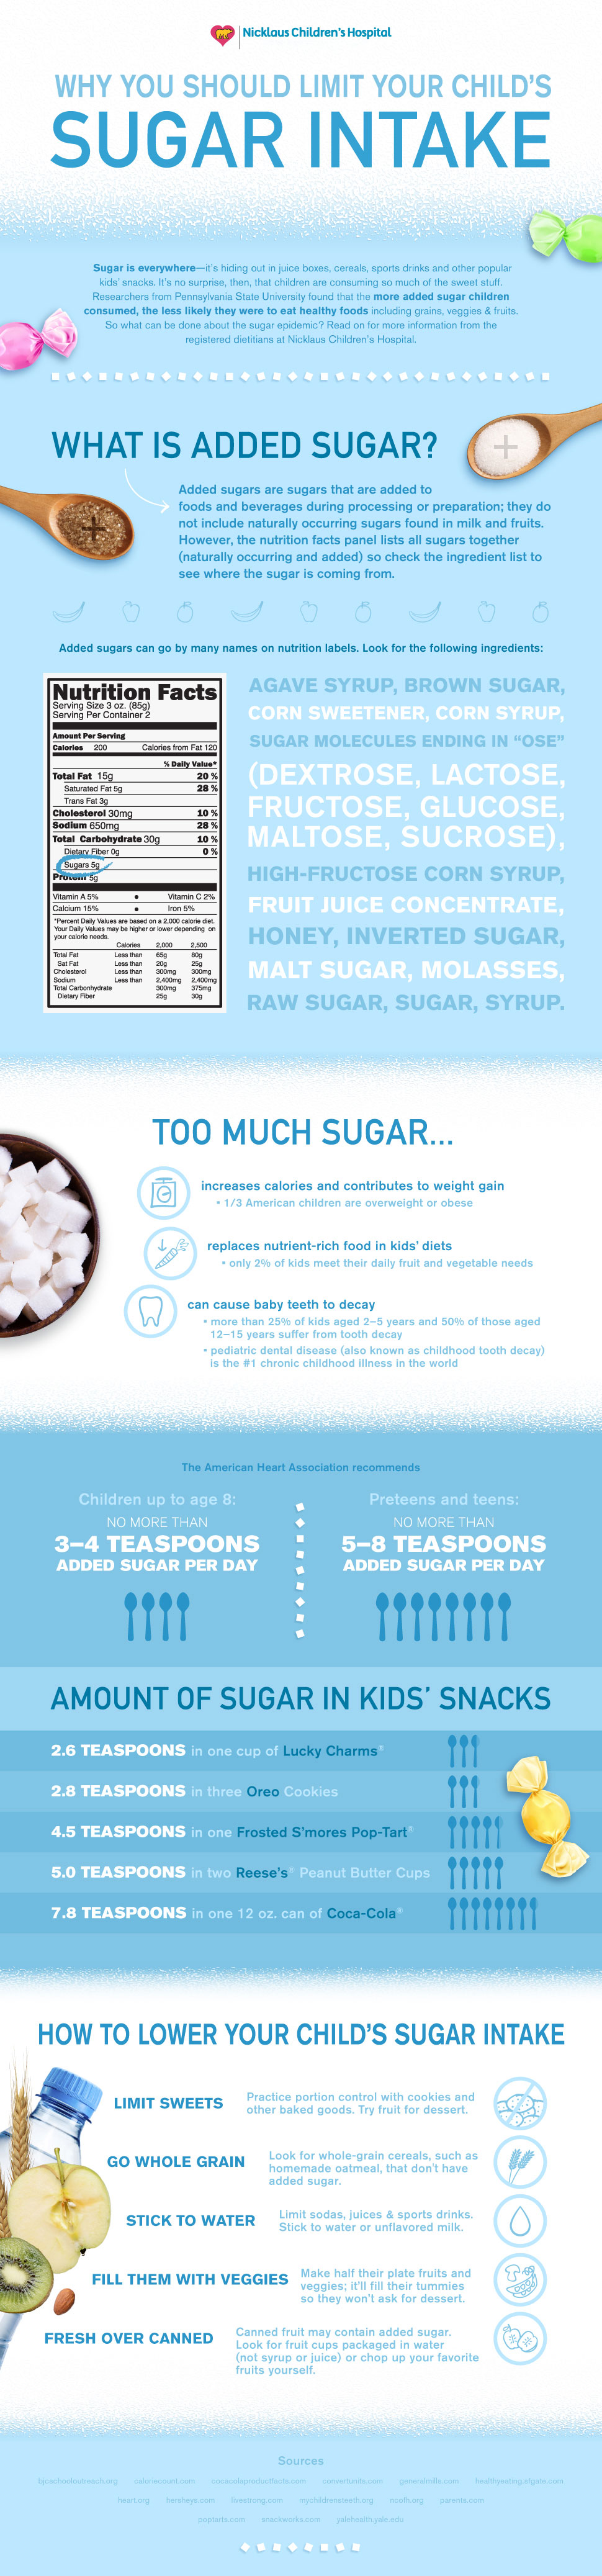 Why you should limit your kids' sugar intake infographic